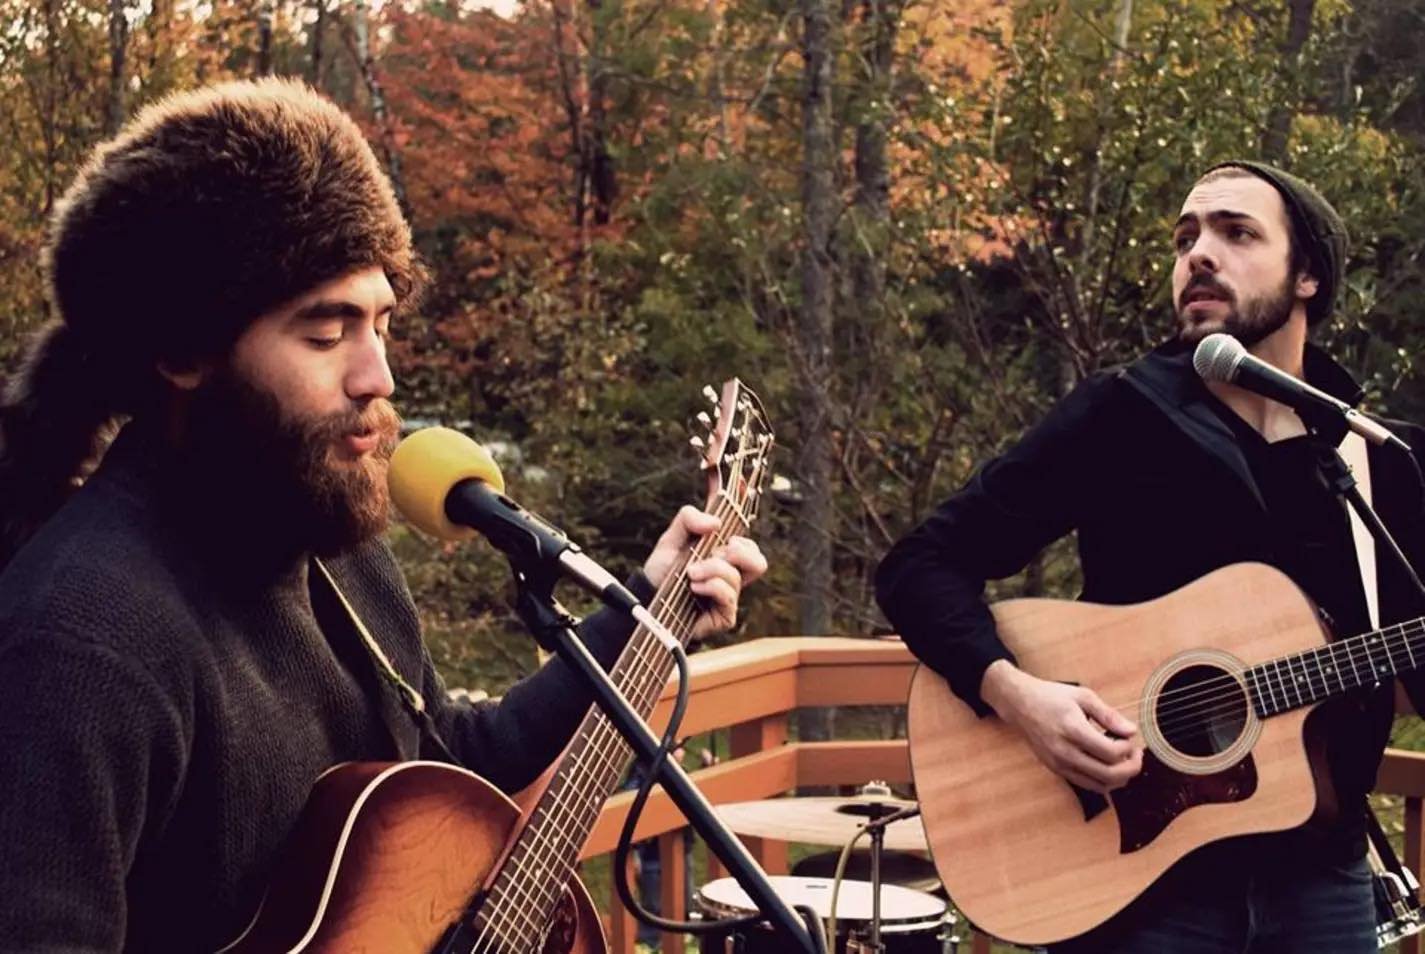 🎵 OXBOW &amp; MOOR

Saturday, May 4 &bull; 1-4pm

Drawing their musical styling from many sources, one song may provide intimate harmonies over finger-picking, while the next may layer the groove with tasty drums and crunchy guitar, while some bring